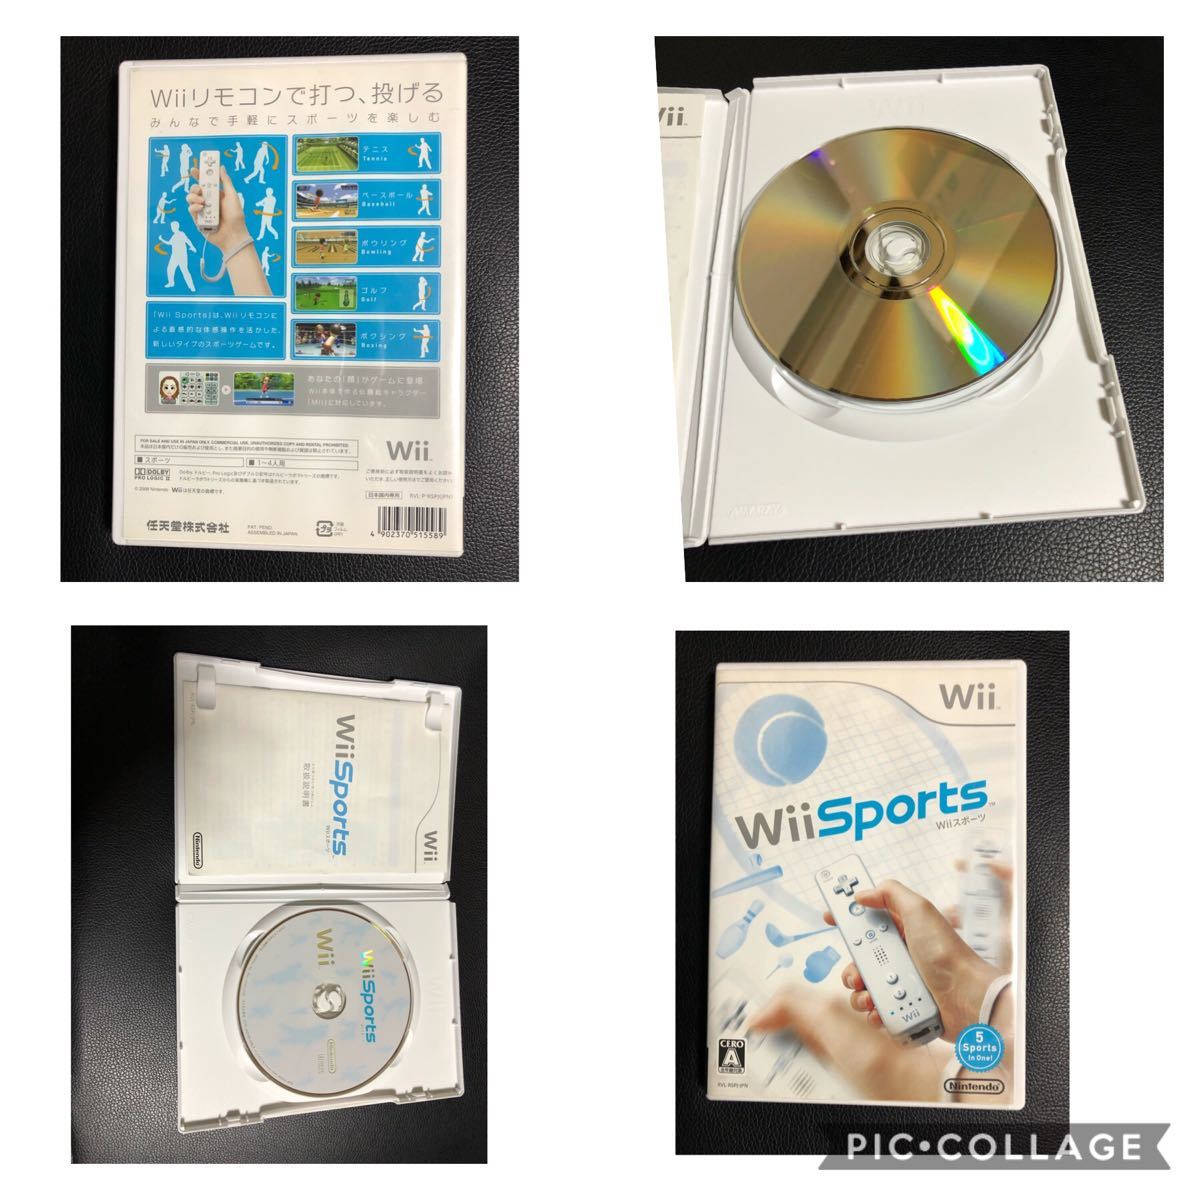 【Wii】 Wii Sports と 初めてのwii 